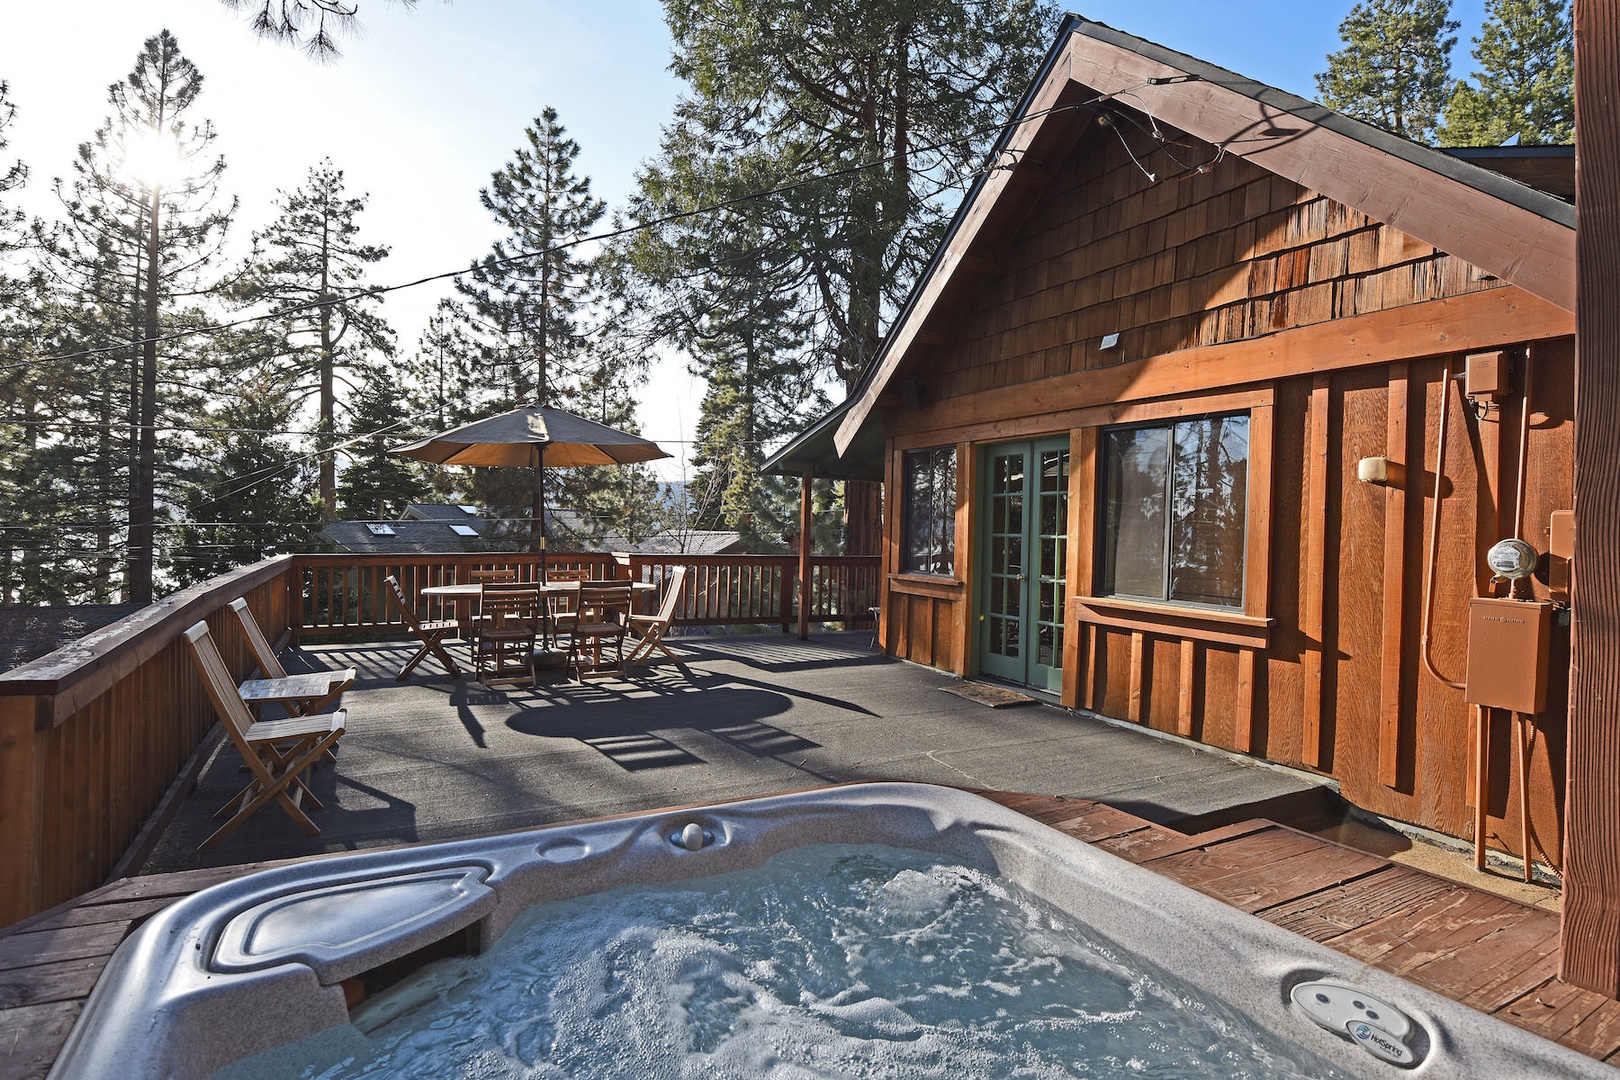 Take a soak in the private outdoor hot tub